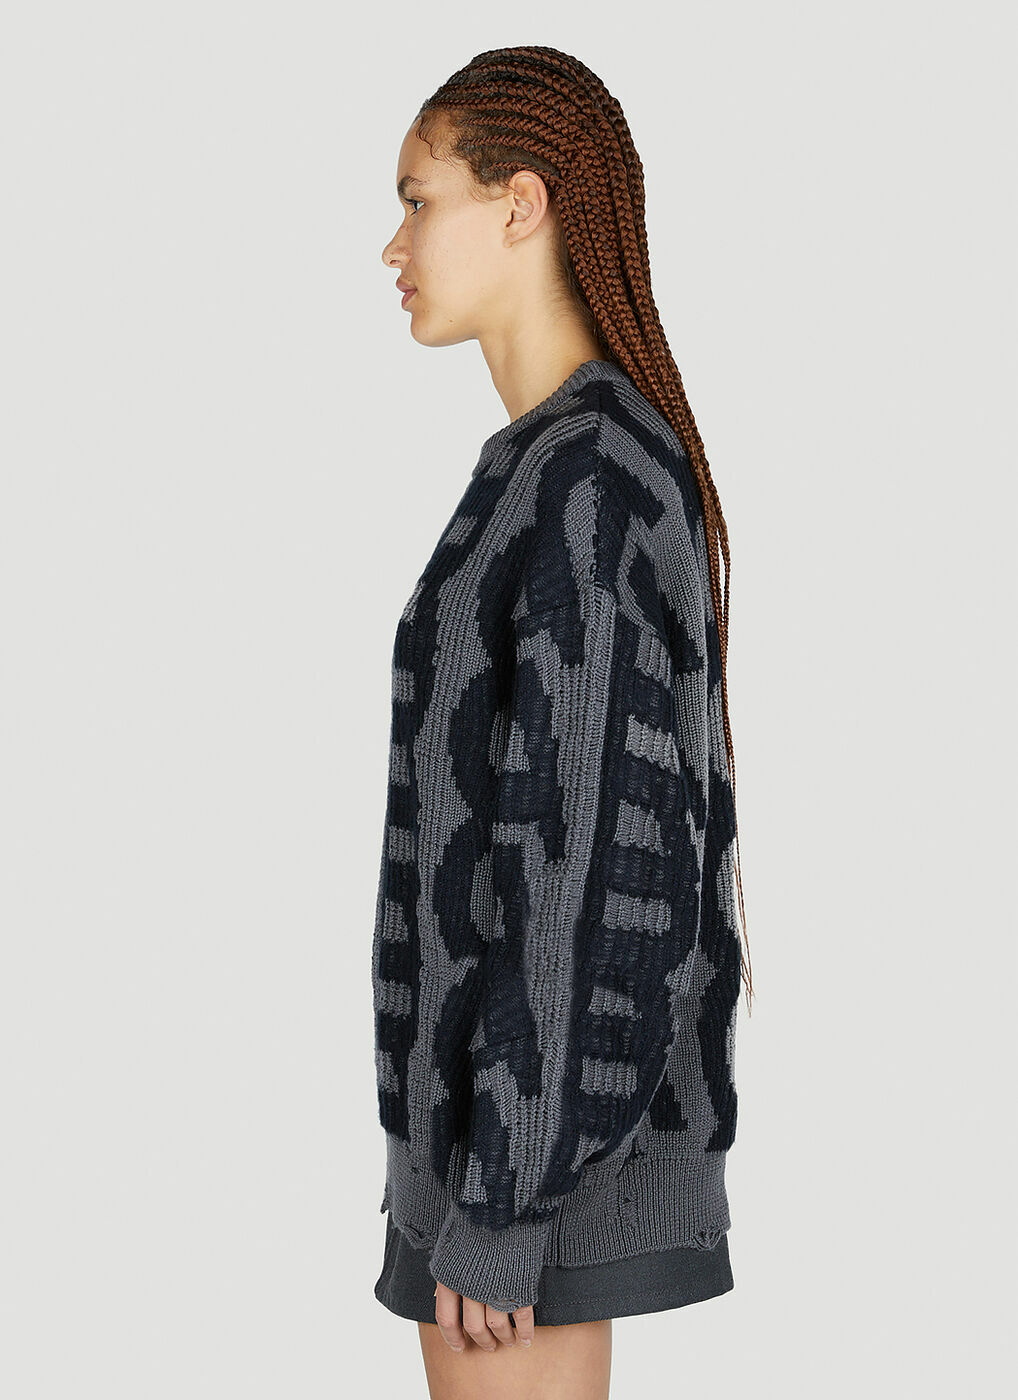 Women's Distressed Monogram Sweater by Marc Jacobs